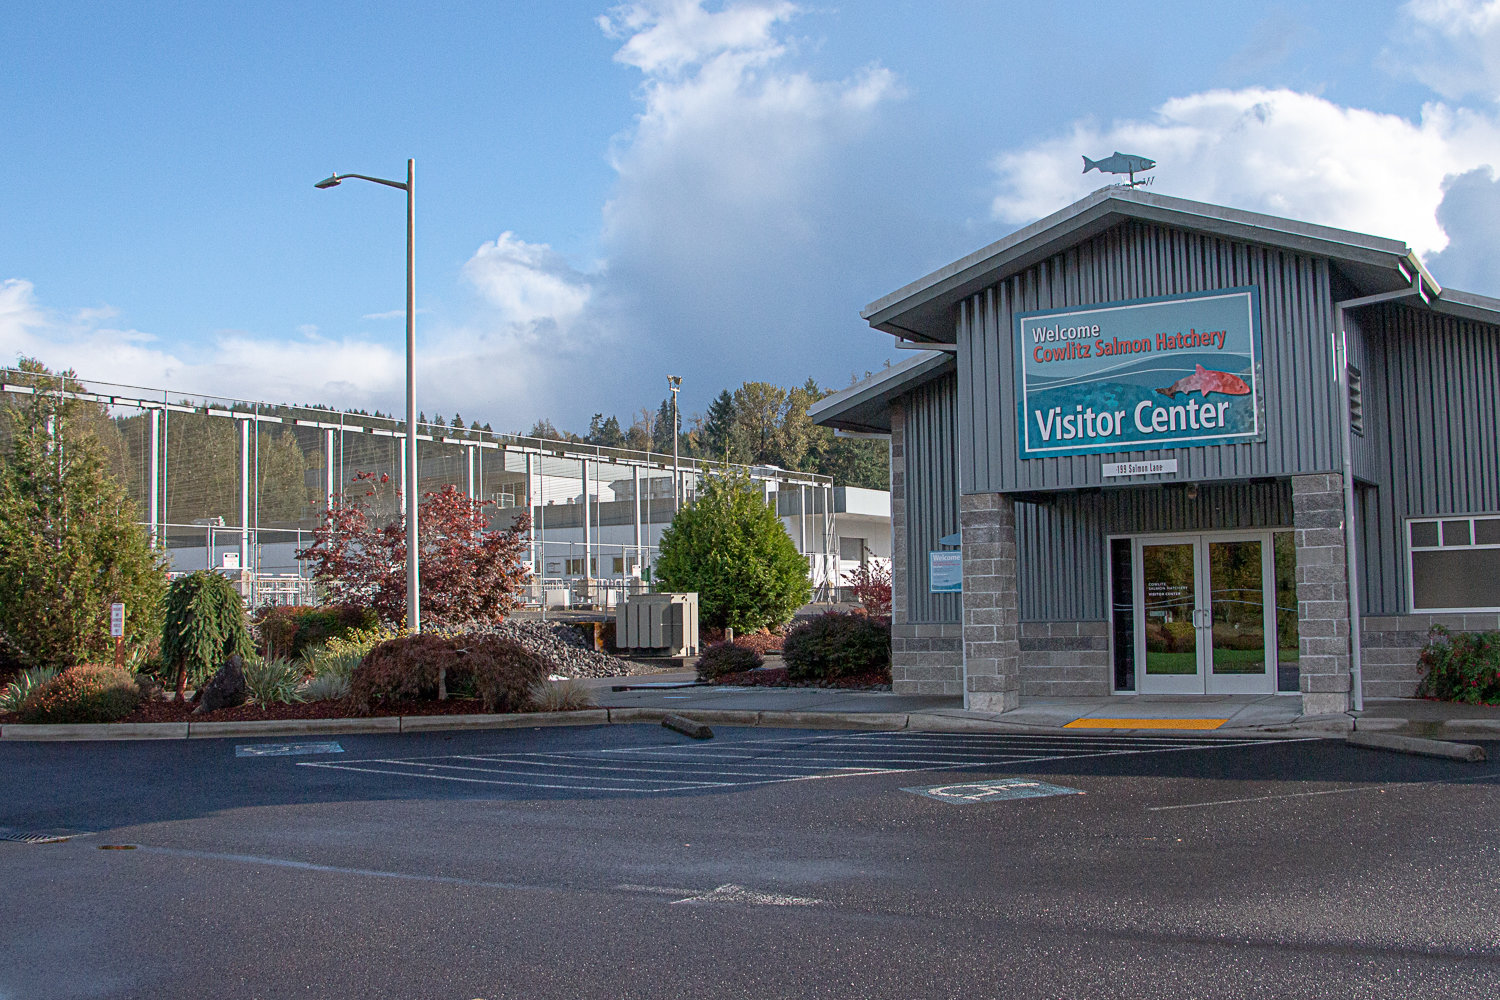 The Cowlitz Salmon Hatchery is one of the hatcheries that Tacoma Public Utilities funds as part of the Cowlitz Recovery and Restoration project.